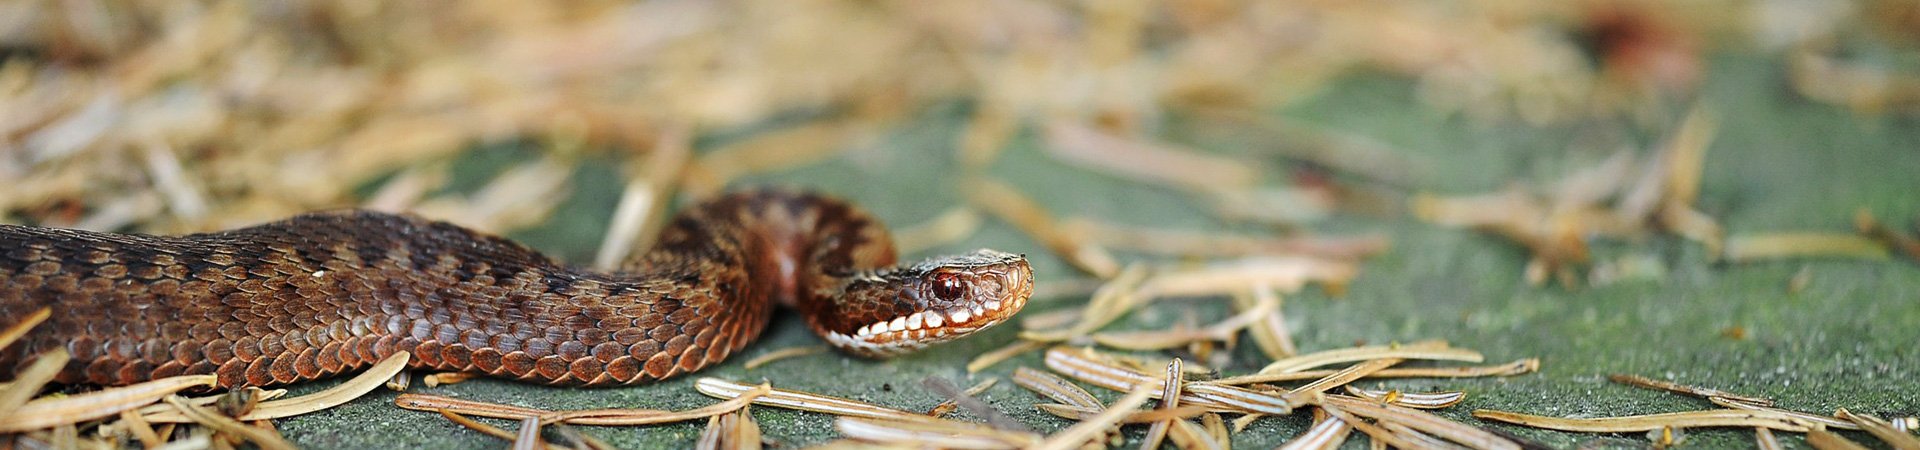 Snake Control | Any Pest